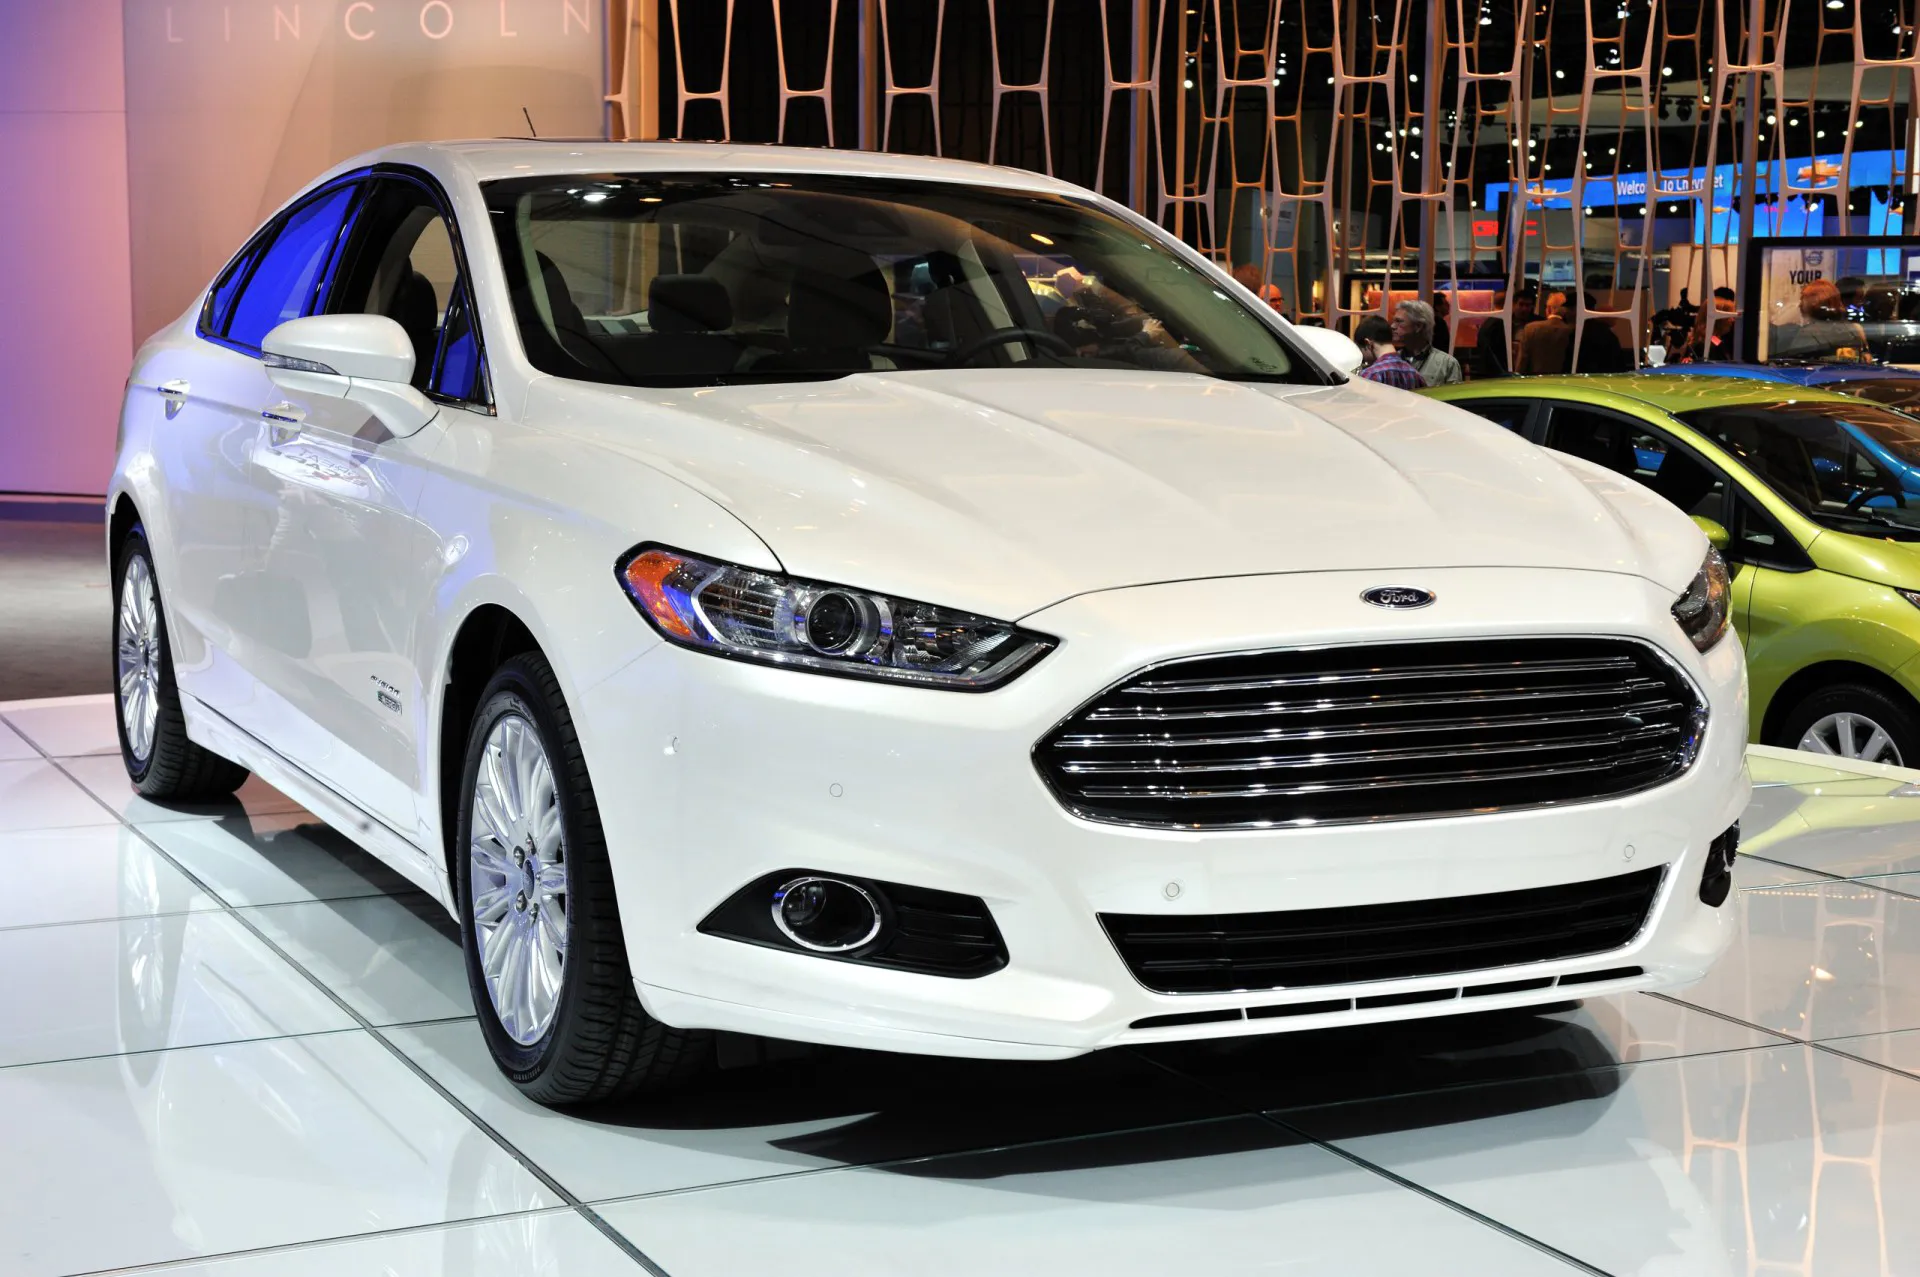 2014 White Ford Fusion display at an auto show